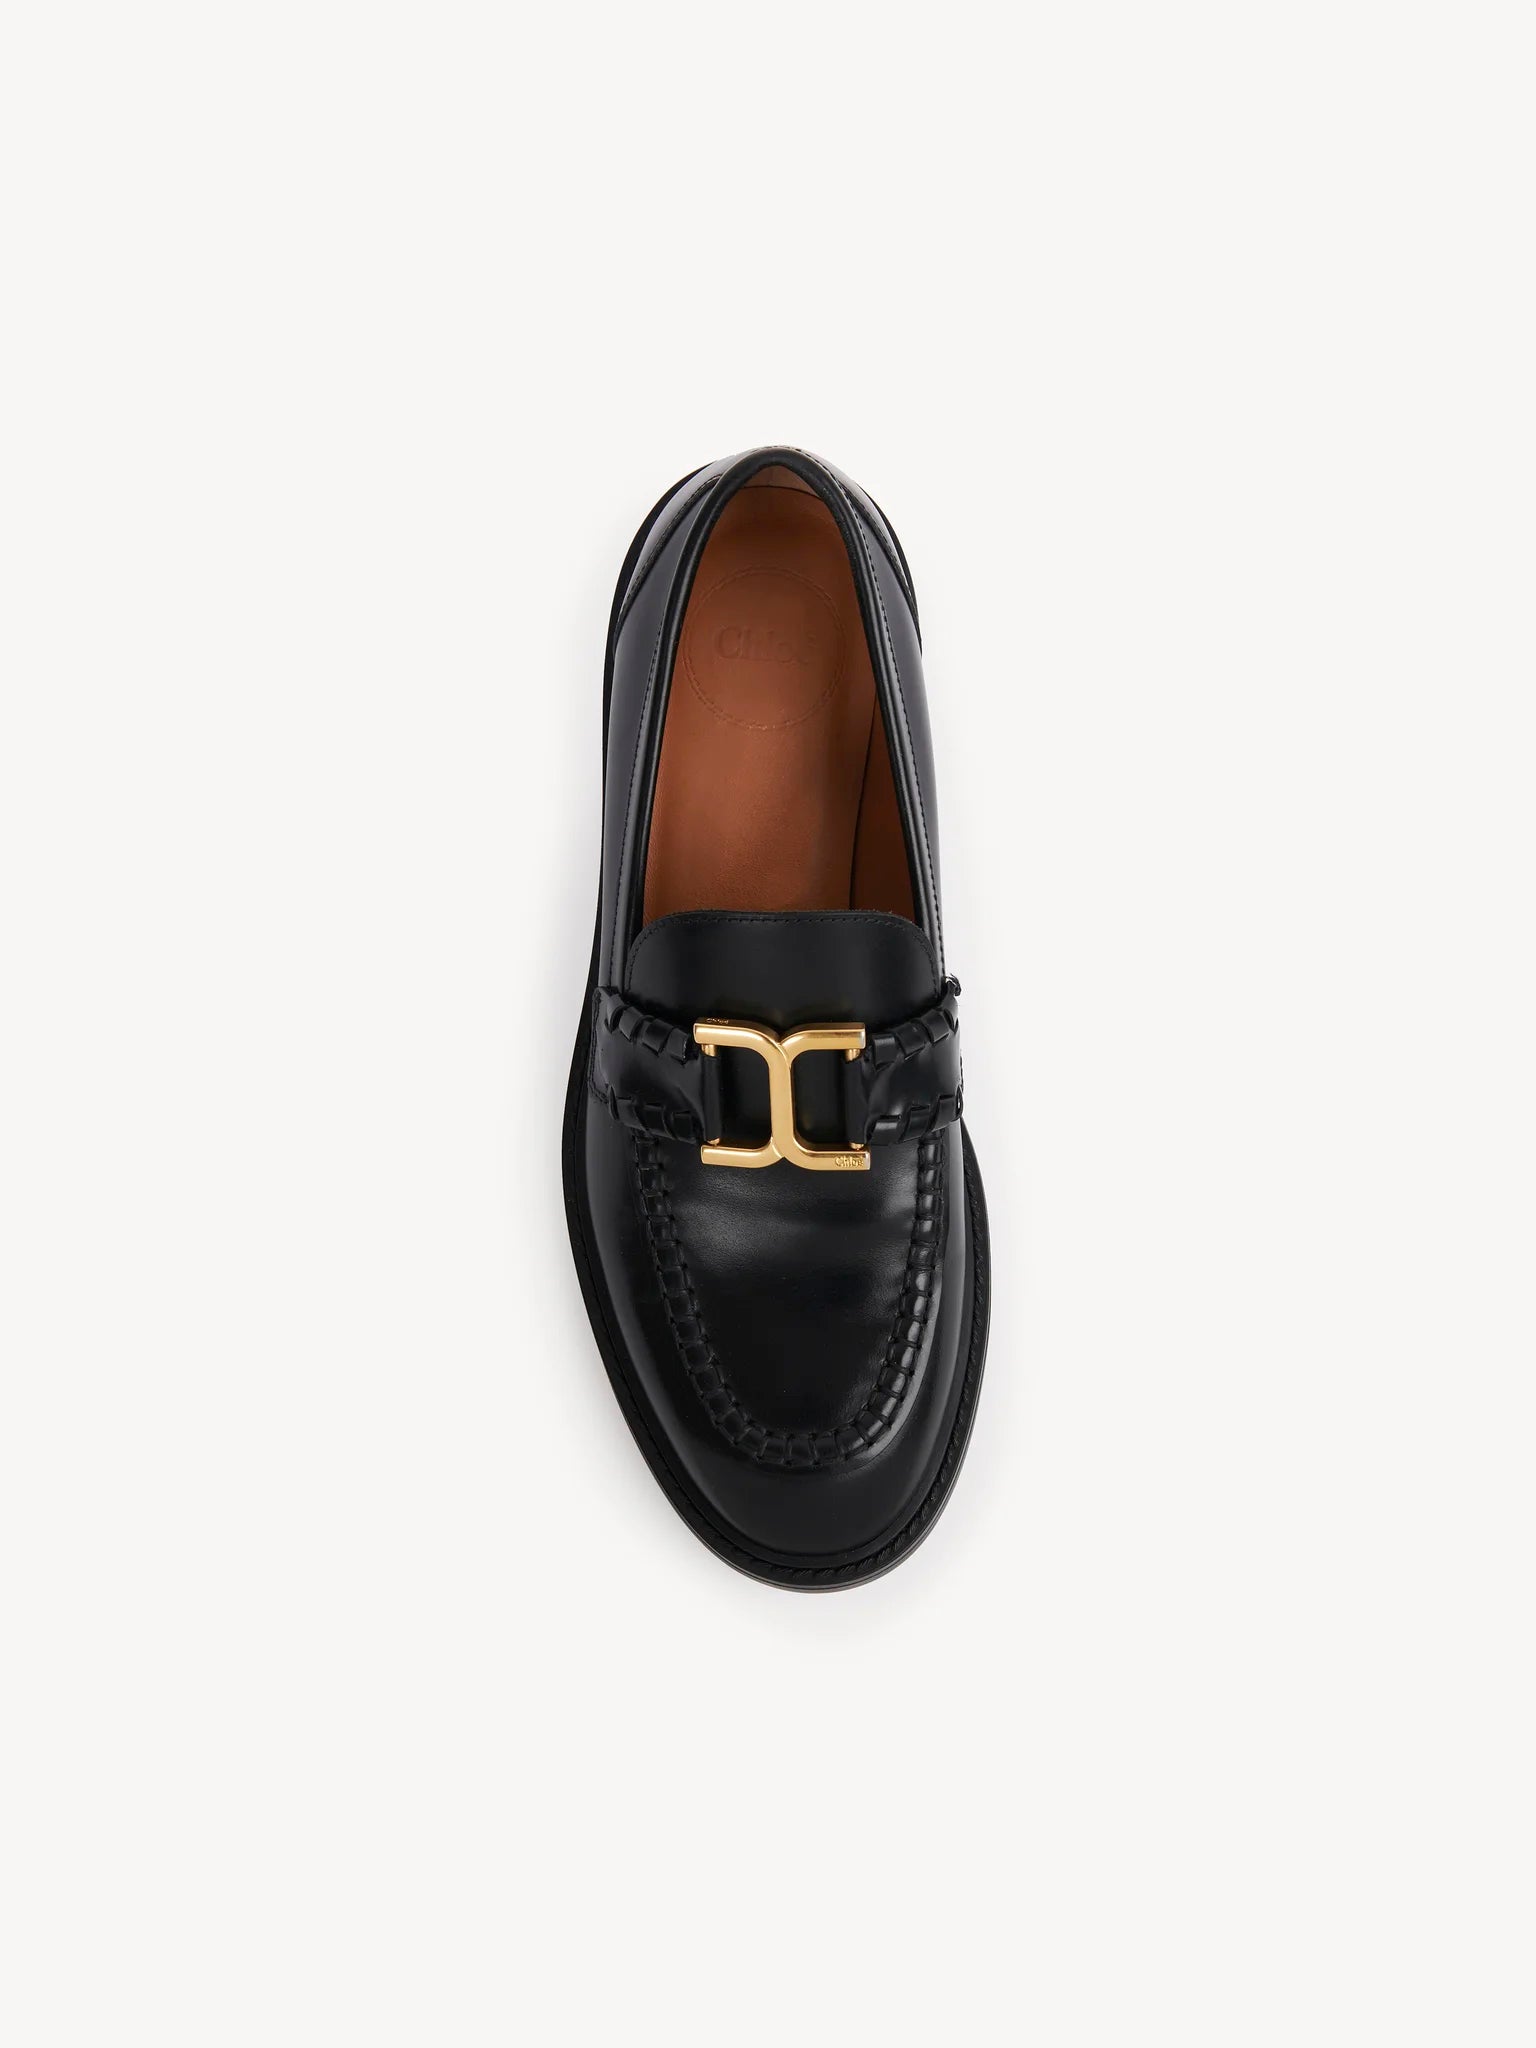 The Chloe Marcie Loafer in Black available at The New Trend Australia.